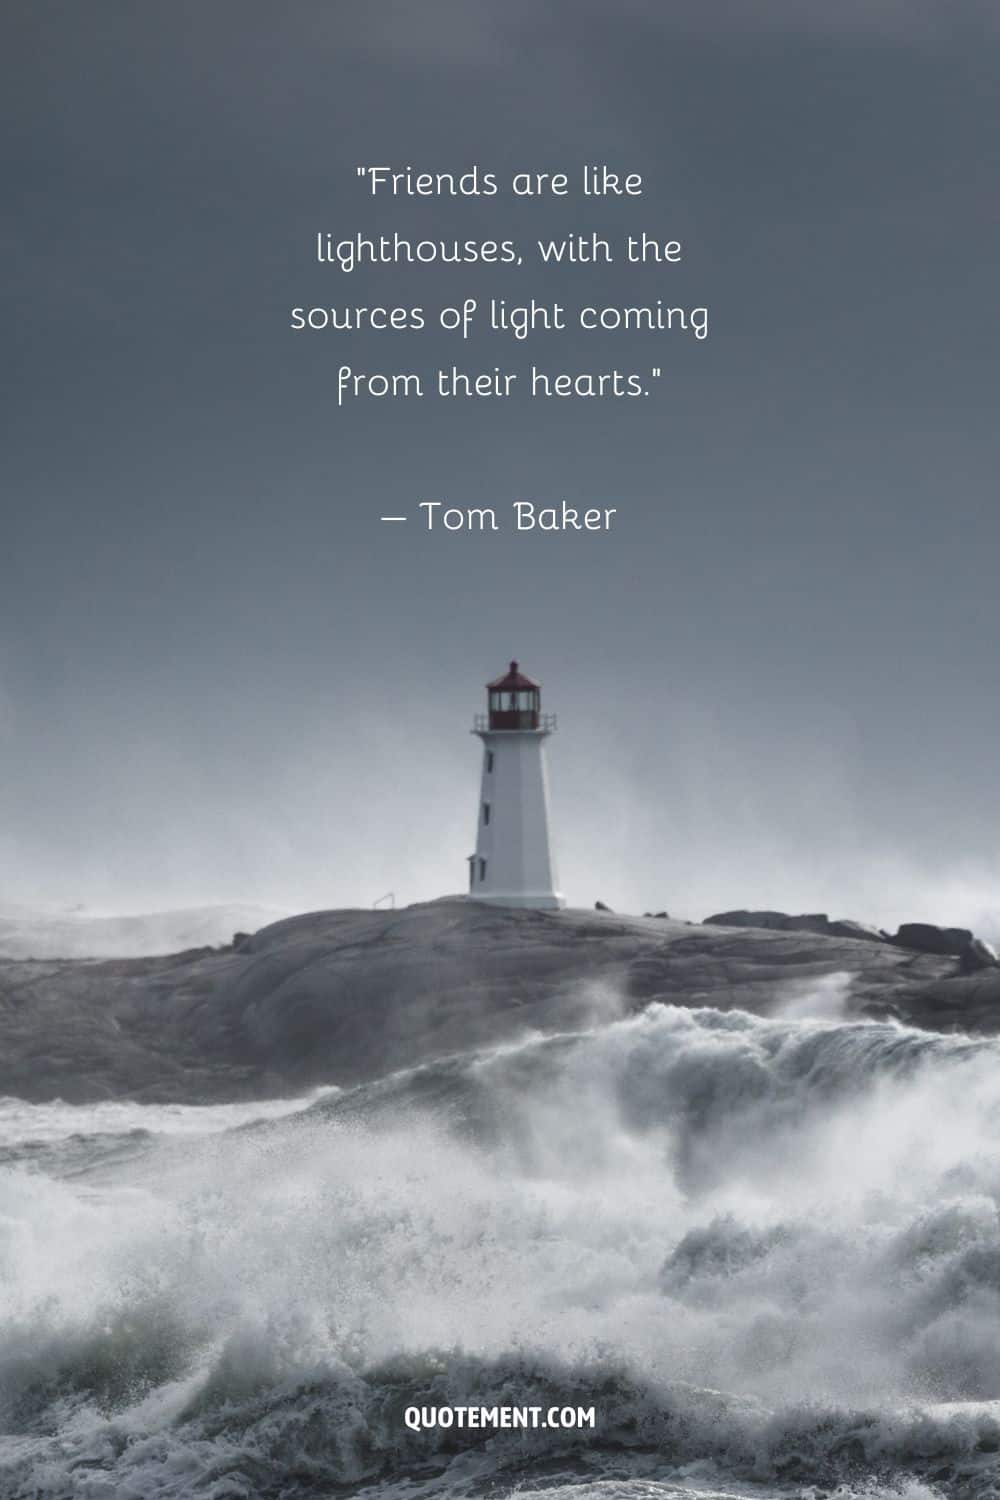 Fascinating quote on friends and lighthouses and a lighthouse in the background